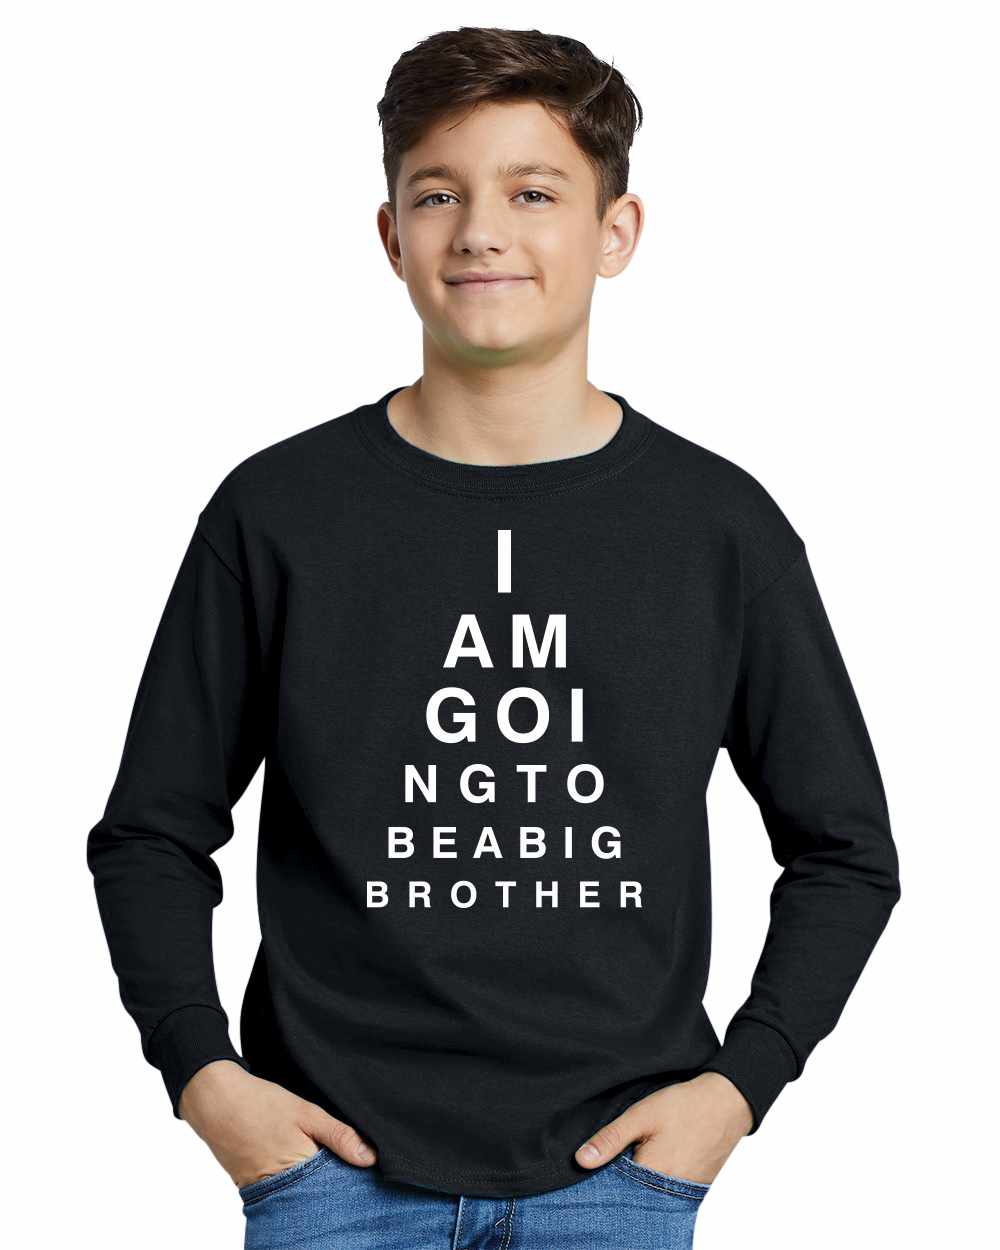 I AM GOING TO BE BIG BROTHER EYE CHART on Youth Long Sleeve Shirt (#1007-203)